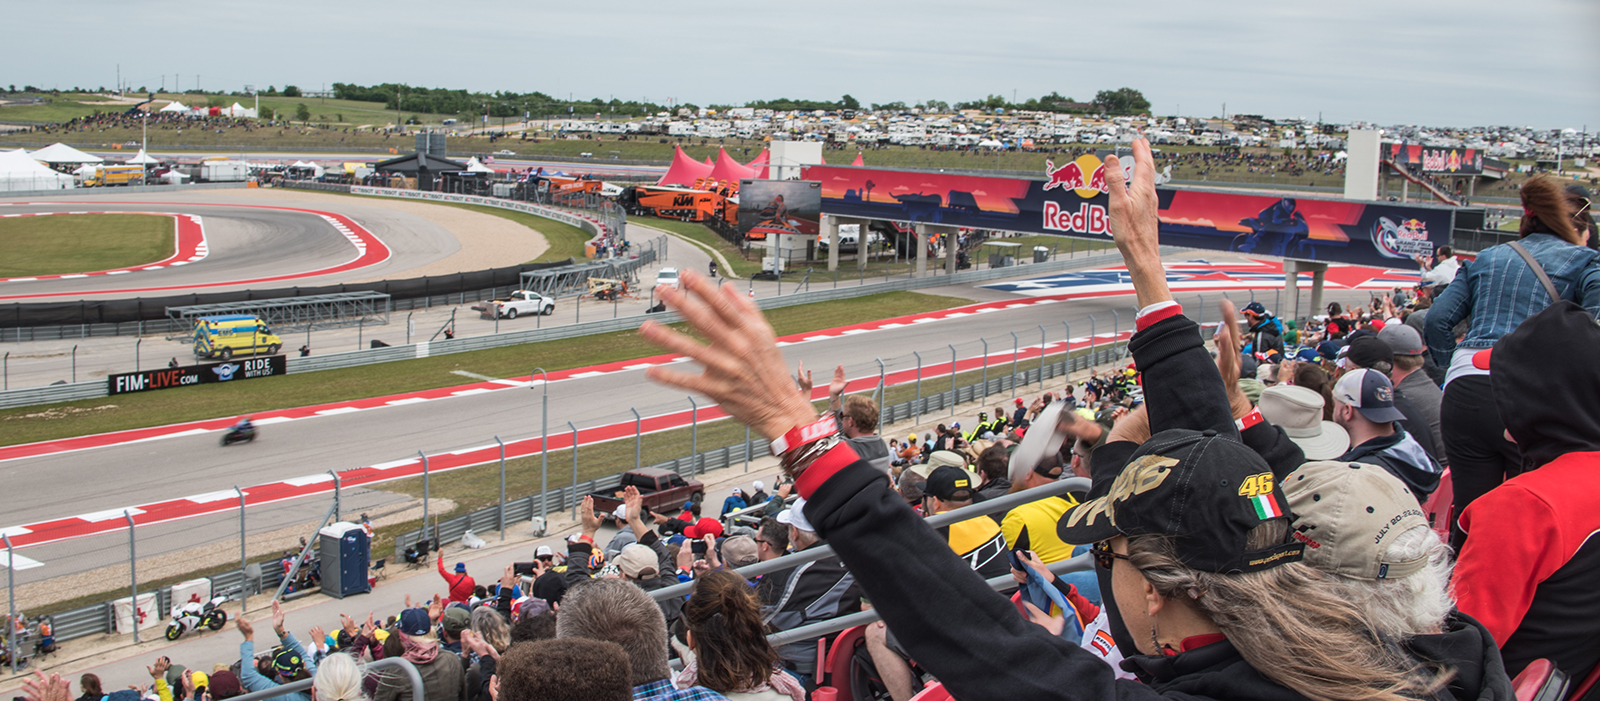 Circuit Of The Americas Main Grandstand Seating Chart